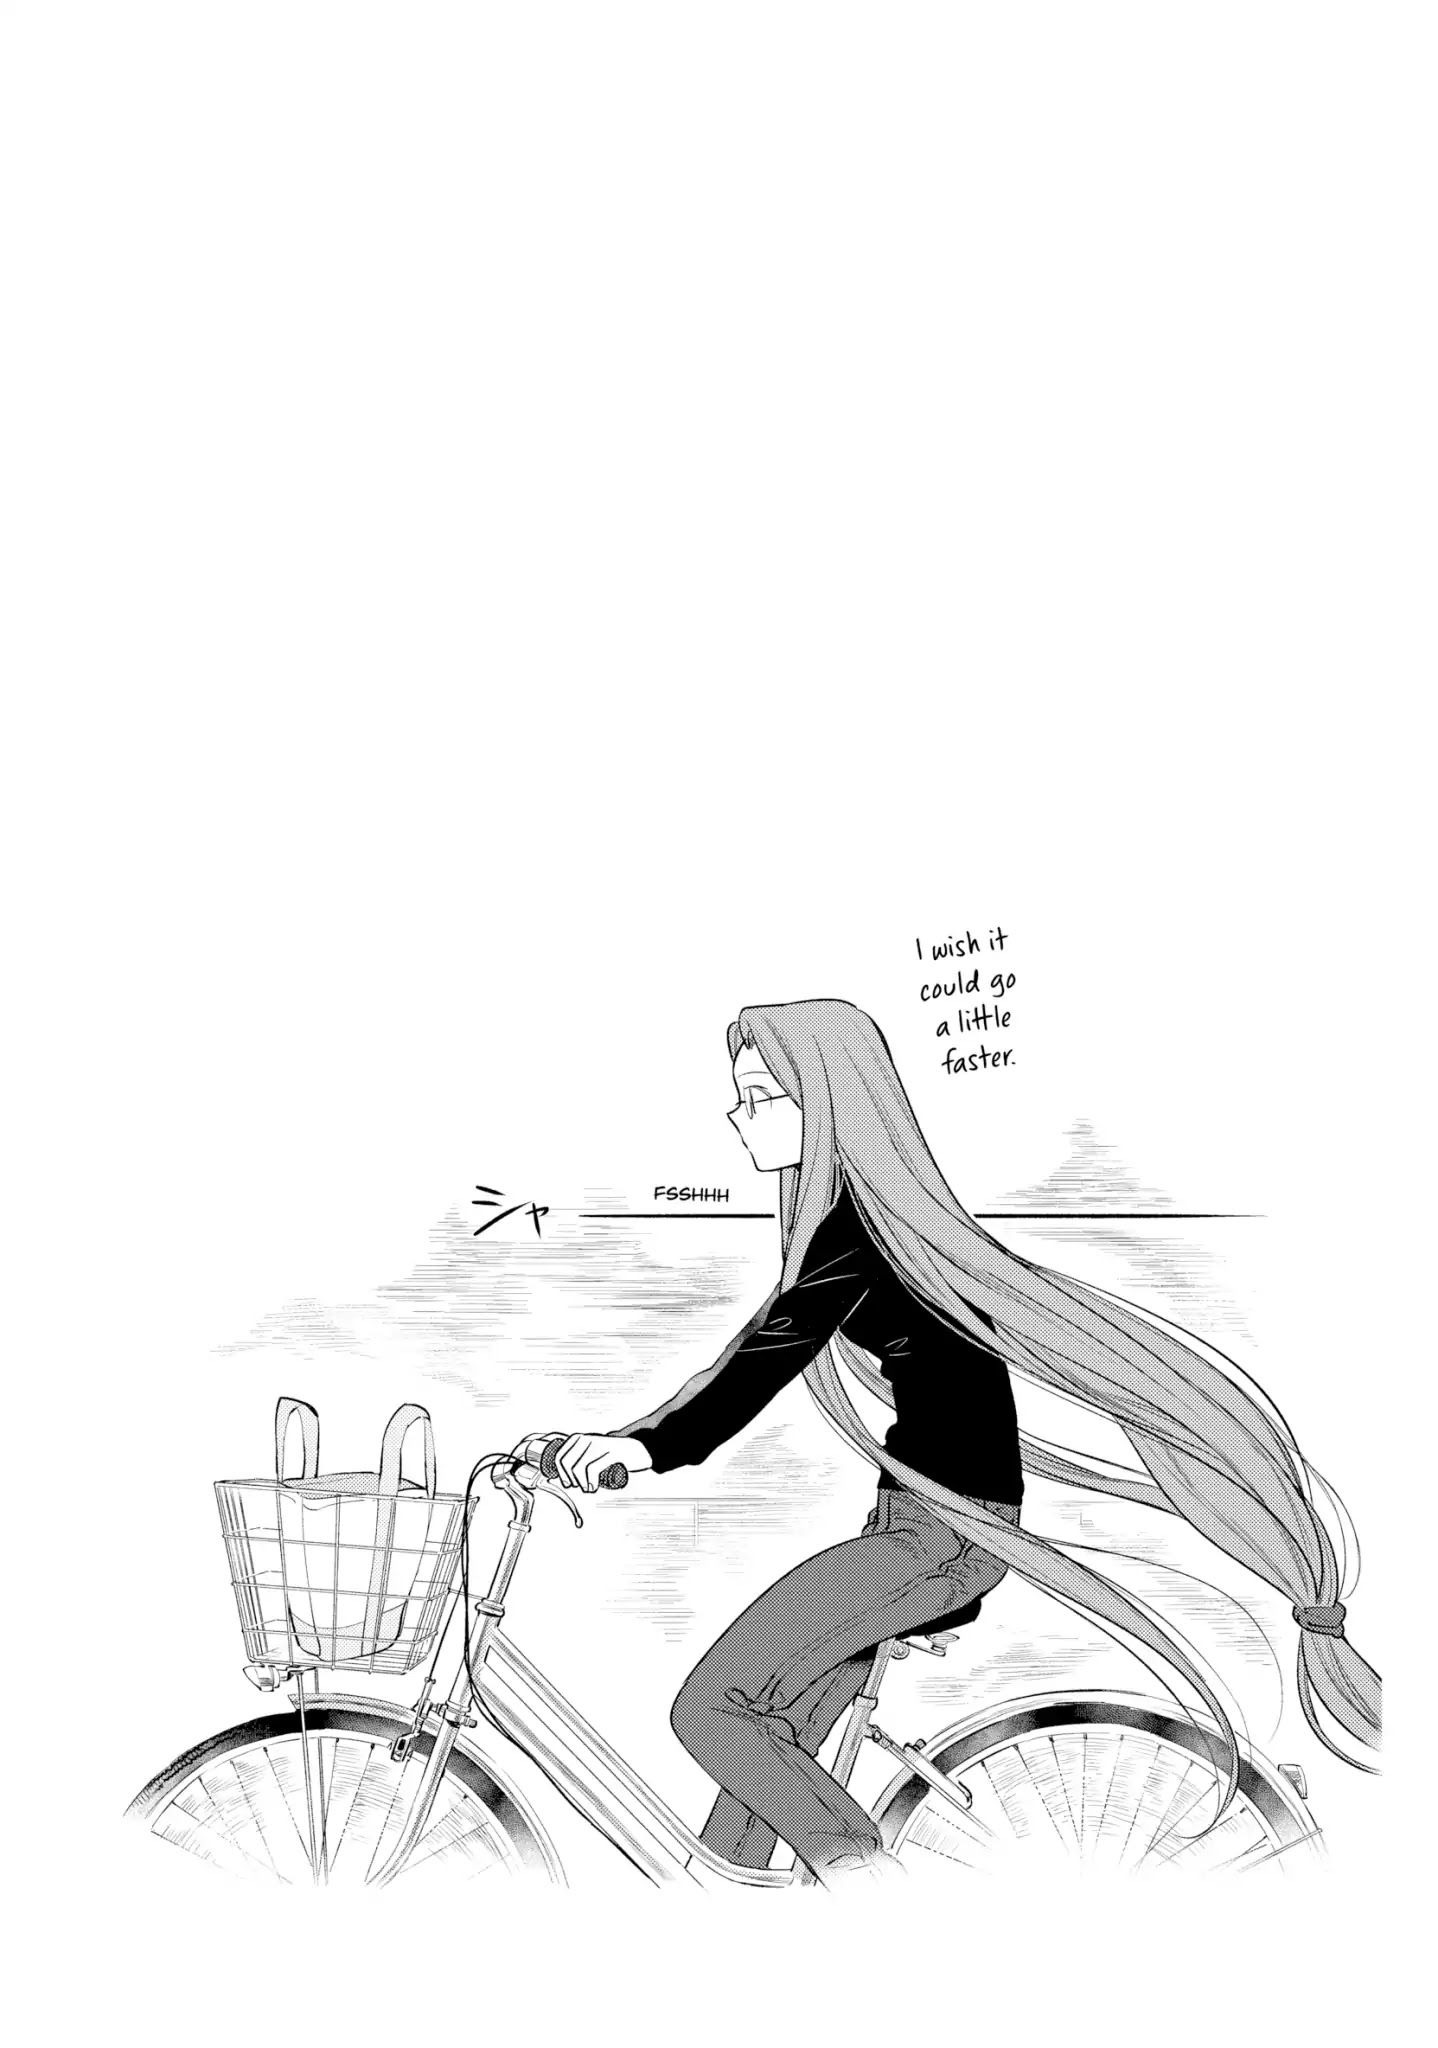 What's Cooking at the Emiya House Today? Chapter 13: Raw Seaweed and Whitebait Pasta